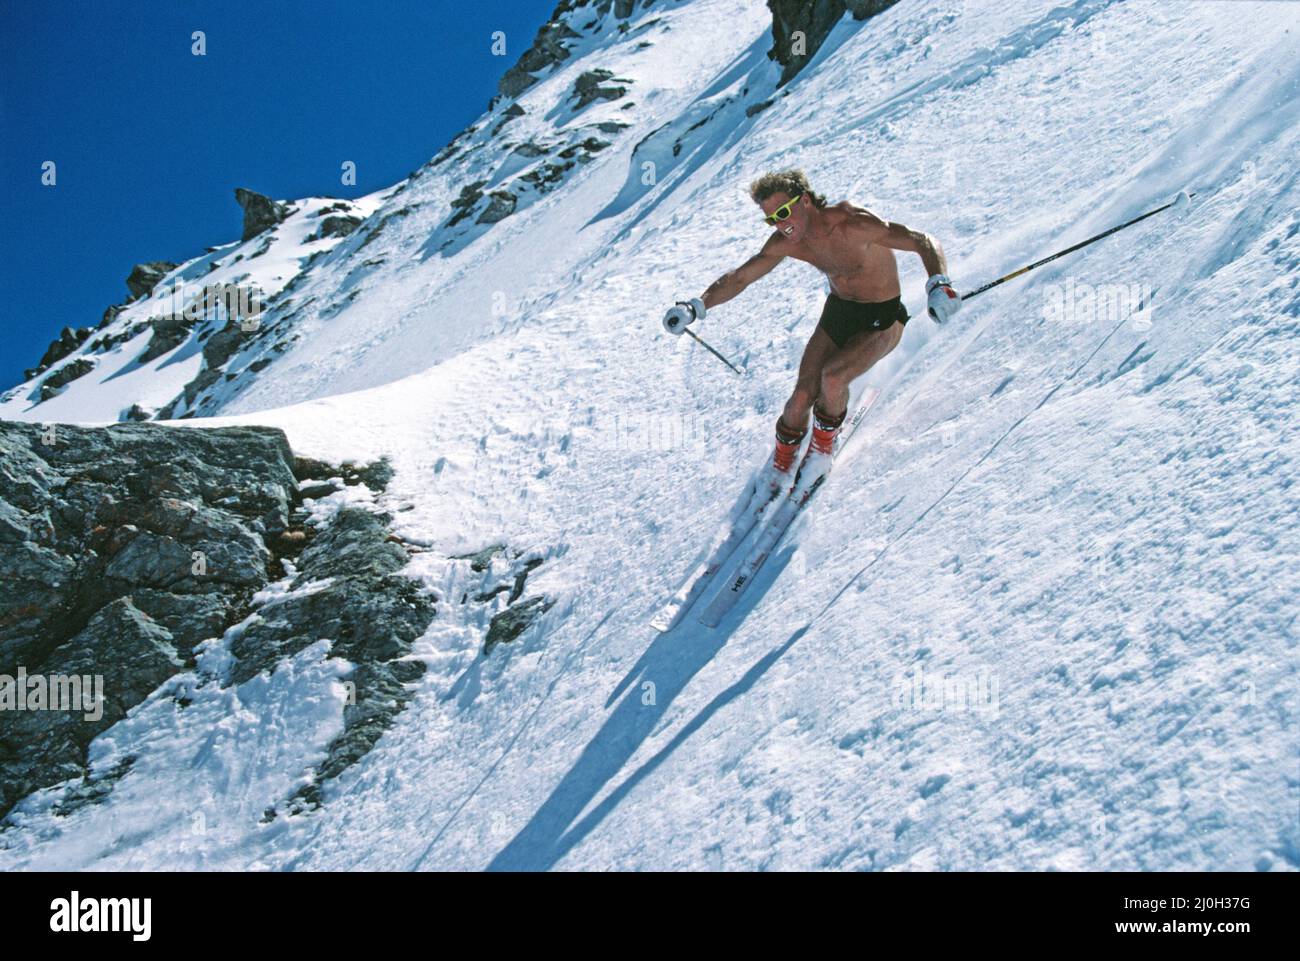 New Zealand. Snow skiing. Young man downhill skiing in shorts, bare-chested. Stock Photo